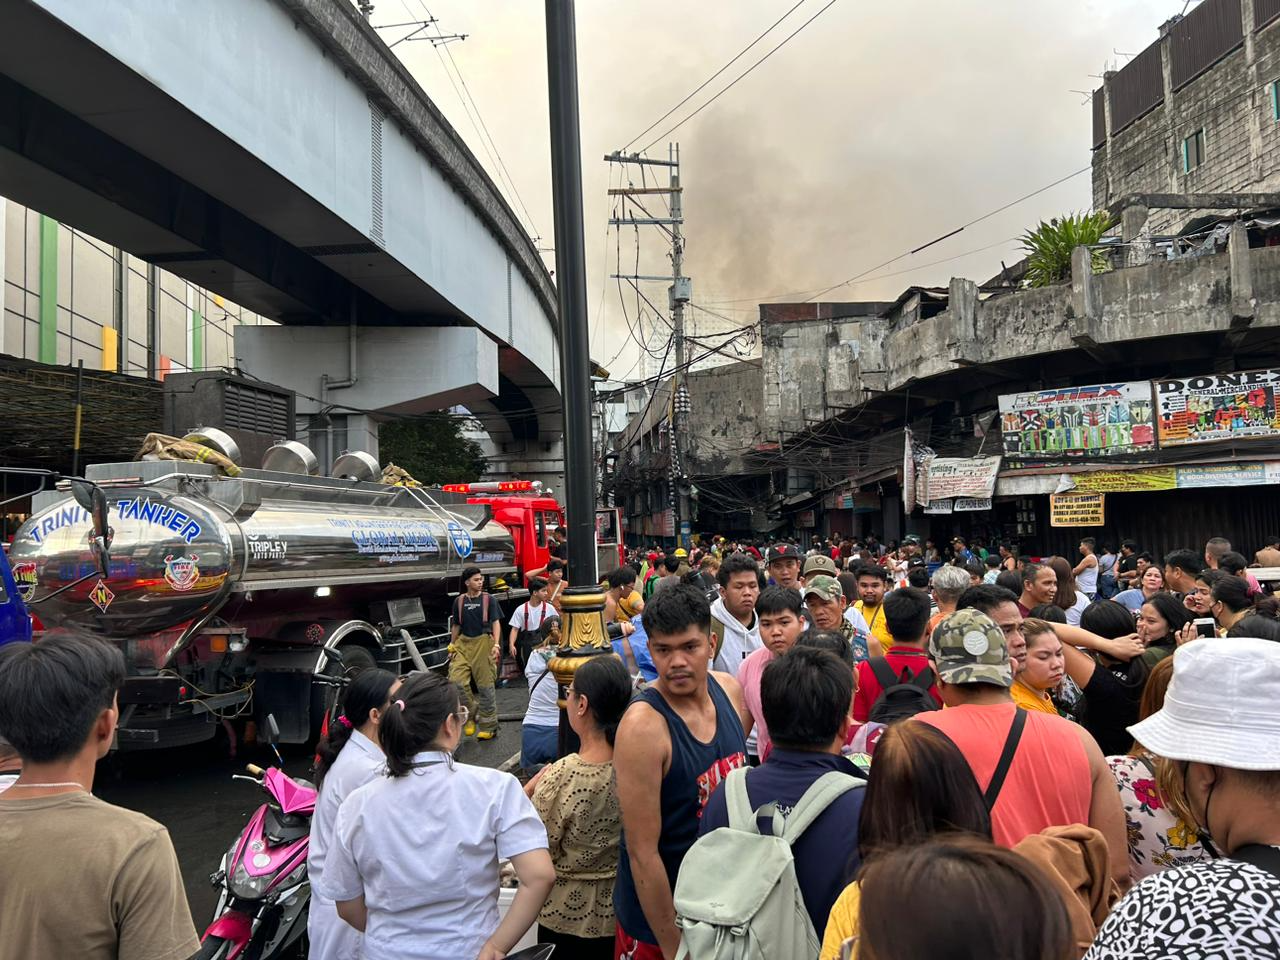 A fire burned a residential unit in front of a shopping center in Recto, Manila, on Wednesday.According to the Bureau of Fire Protection, the fire was reported at 1:14 pm. It went to second alarm by 3:15 pm, third alarm by 3:26 pm, and fourth alarm by 3:40 pm.